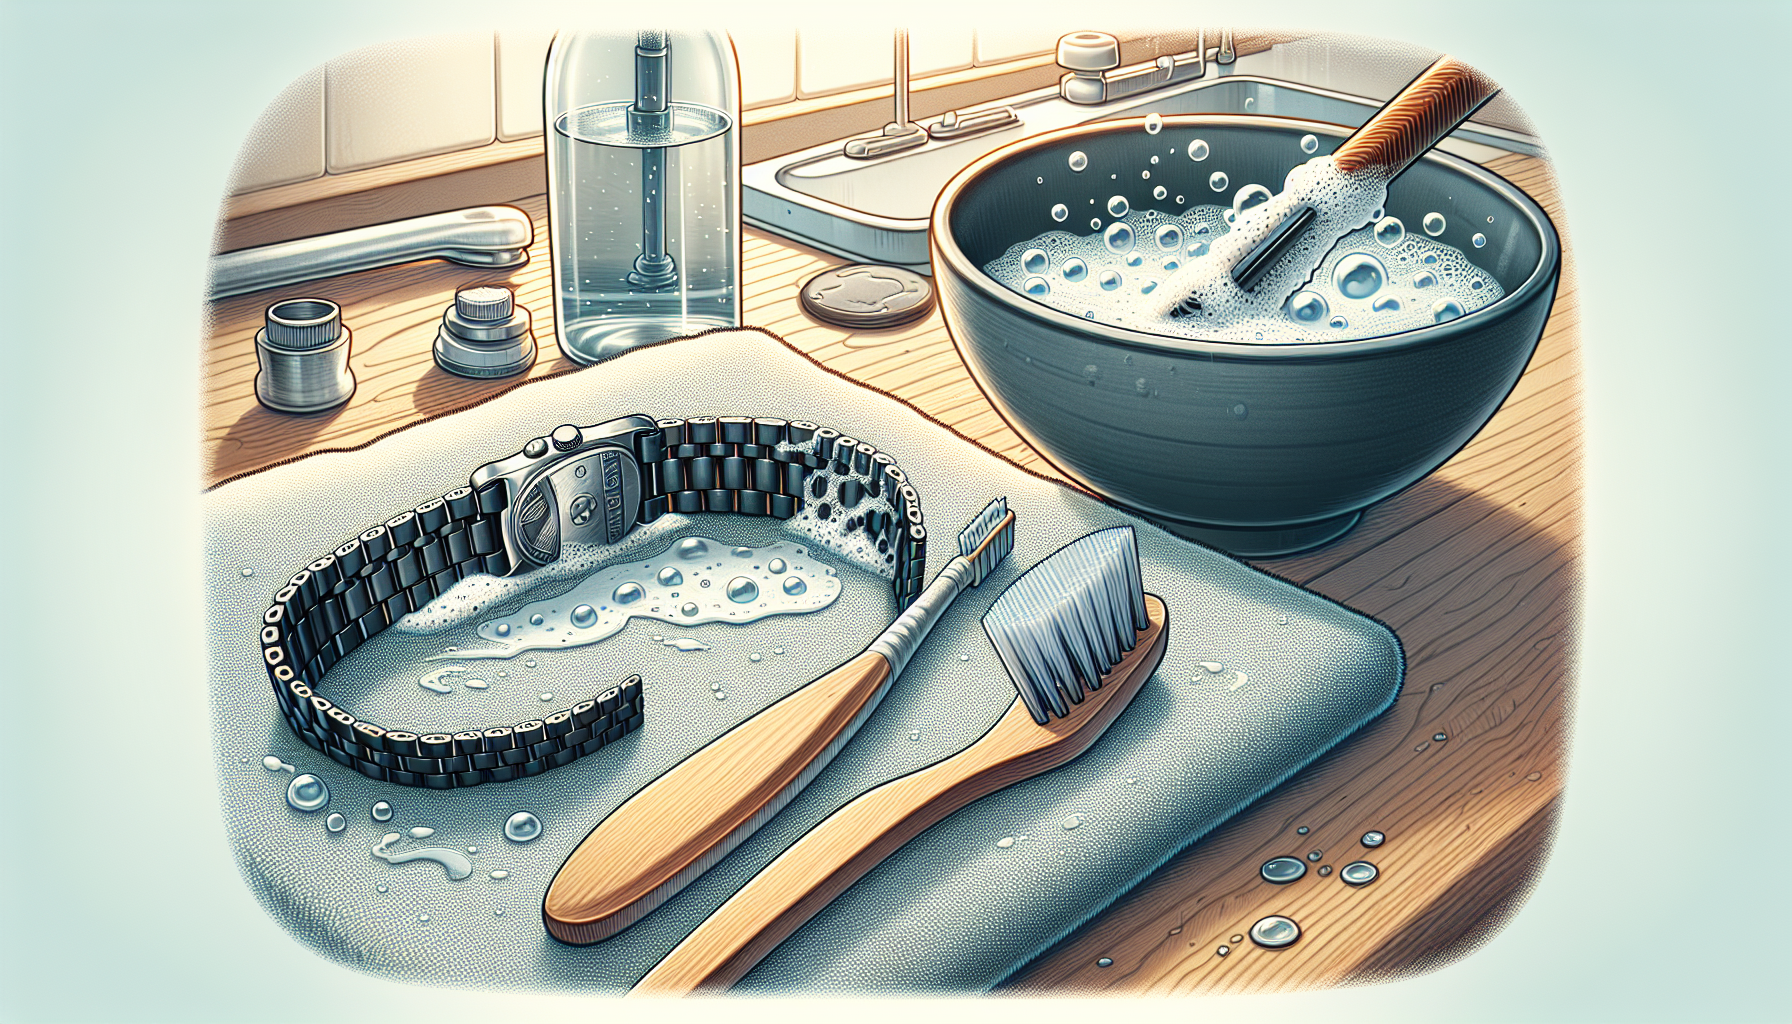 Illustration of cleaning rubber watch bands with soap and water